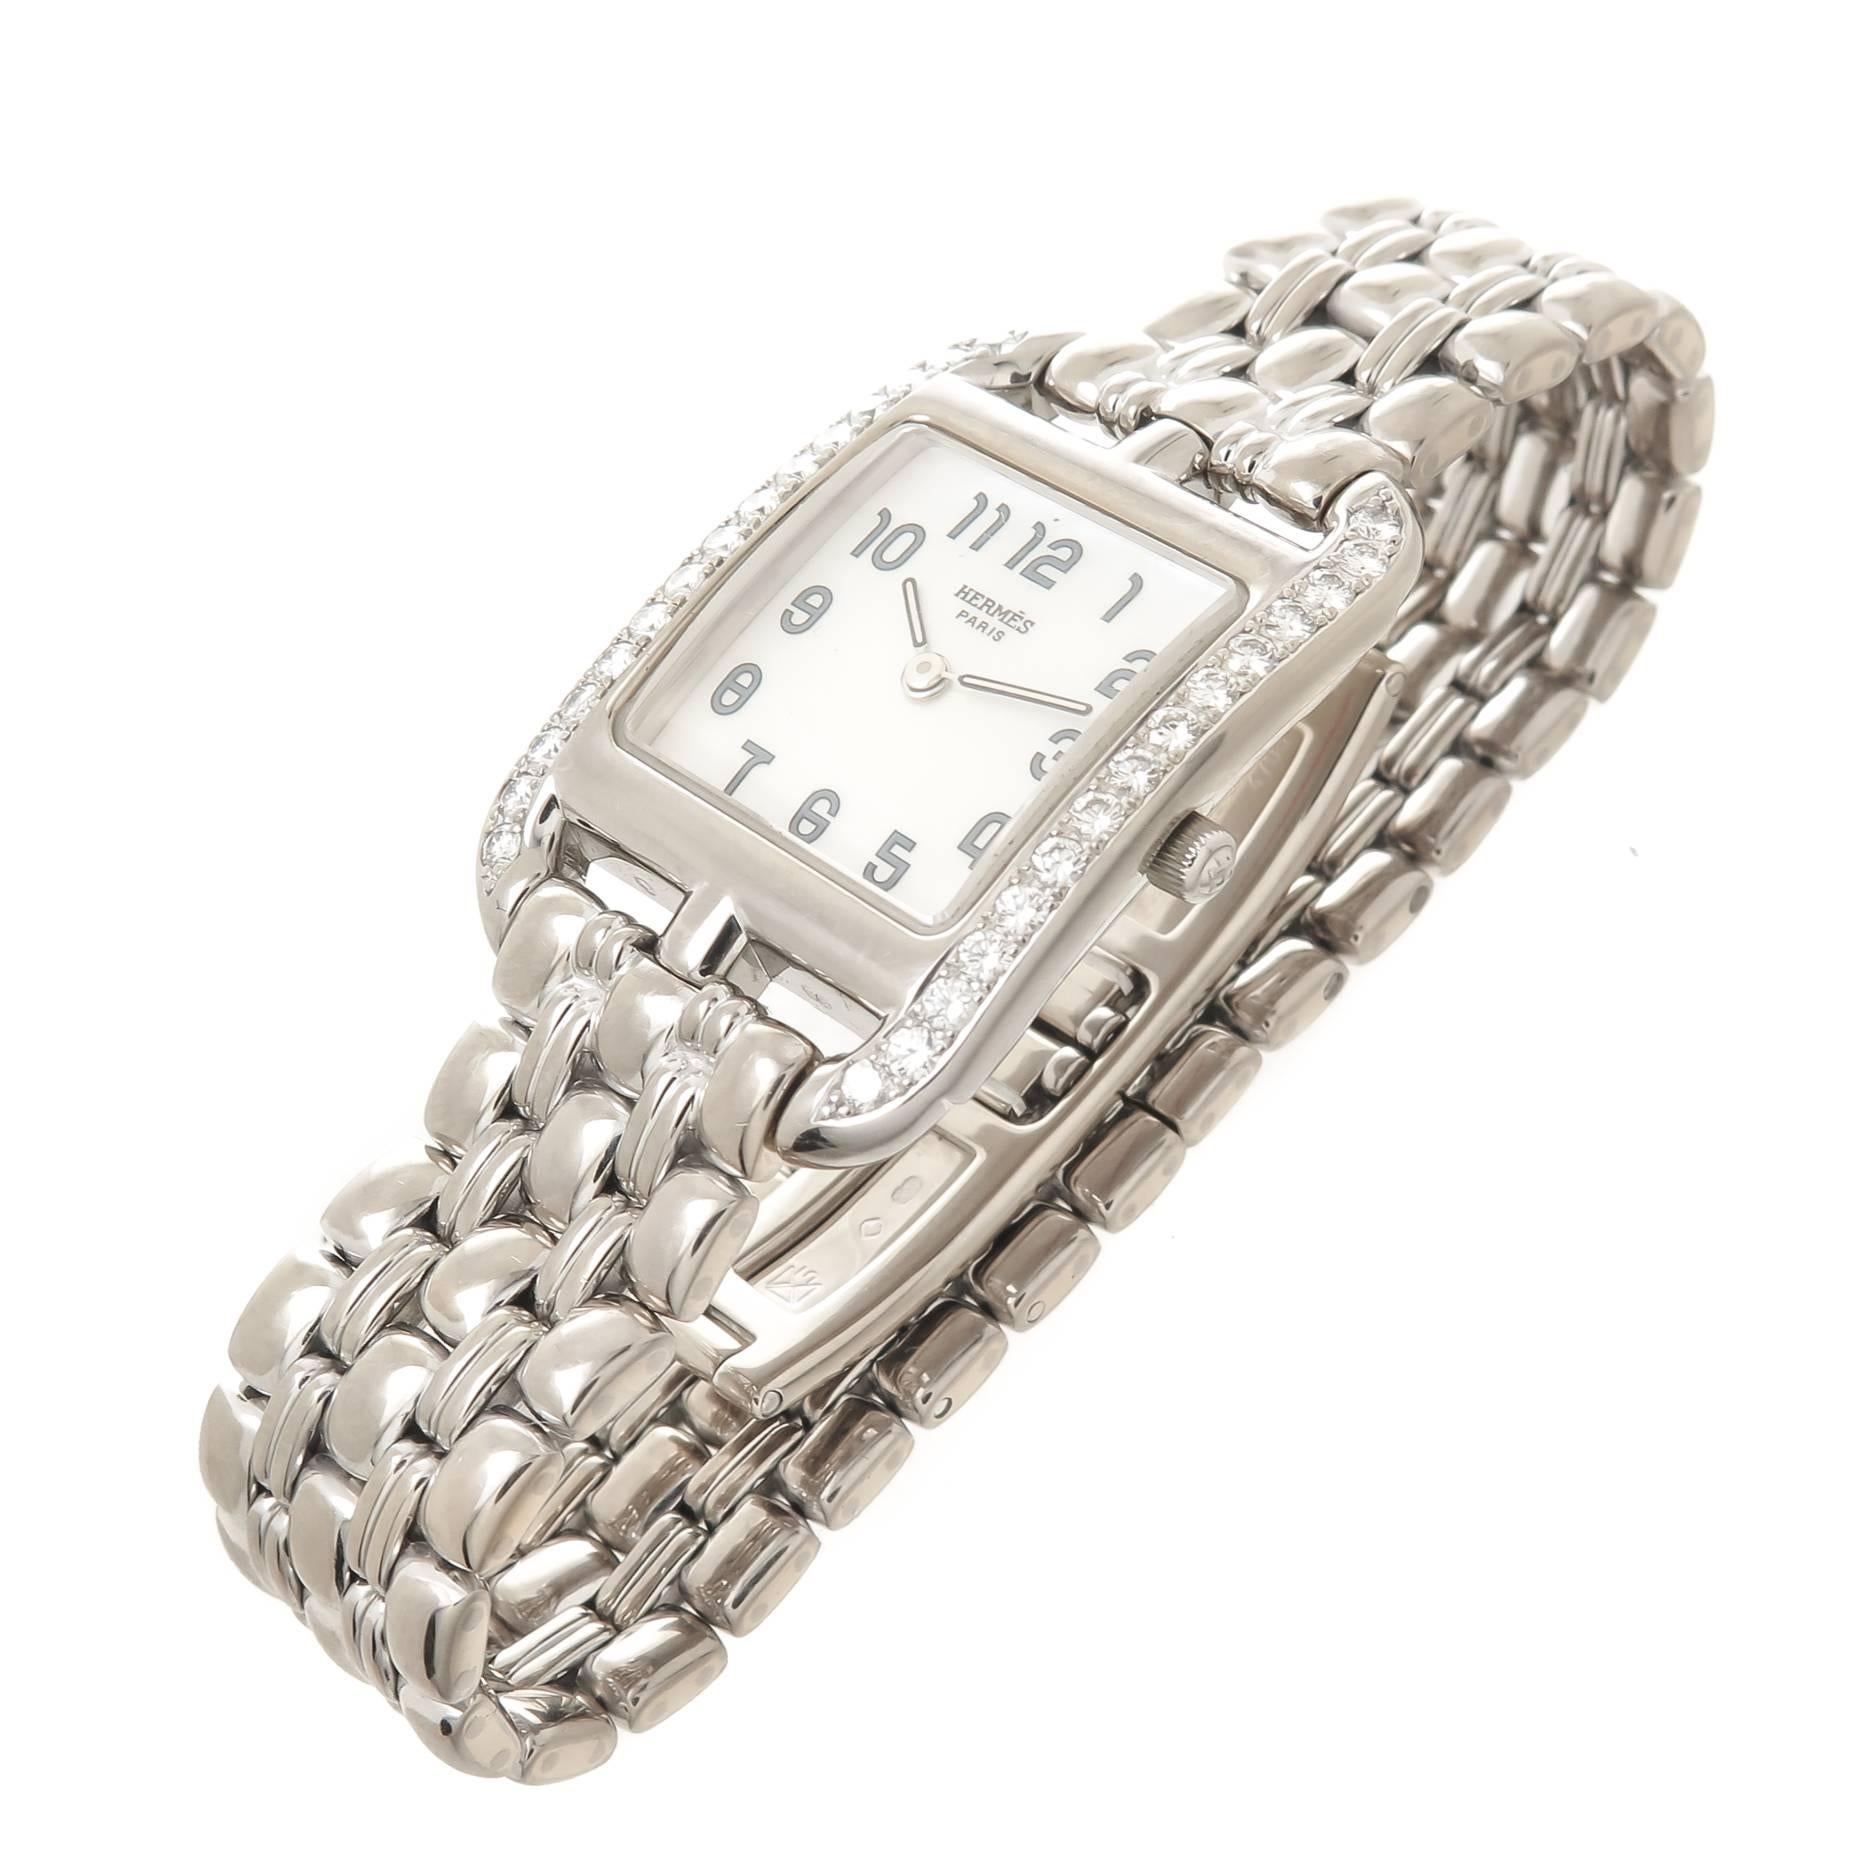 Circa 2012 Hermes Ladies Cape Cod Wrist Watch, 33 X 23 M.M. 18K White Gold Case with Diamonds set on either side and totaling 1 Carat. Quartz Movement, White Mother of Pearl Dial. 5/8 inch wide 18K White Gold Link Bracelet with fold over Deployment